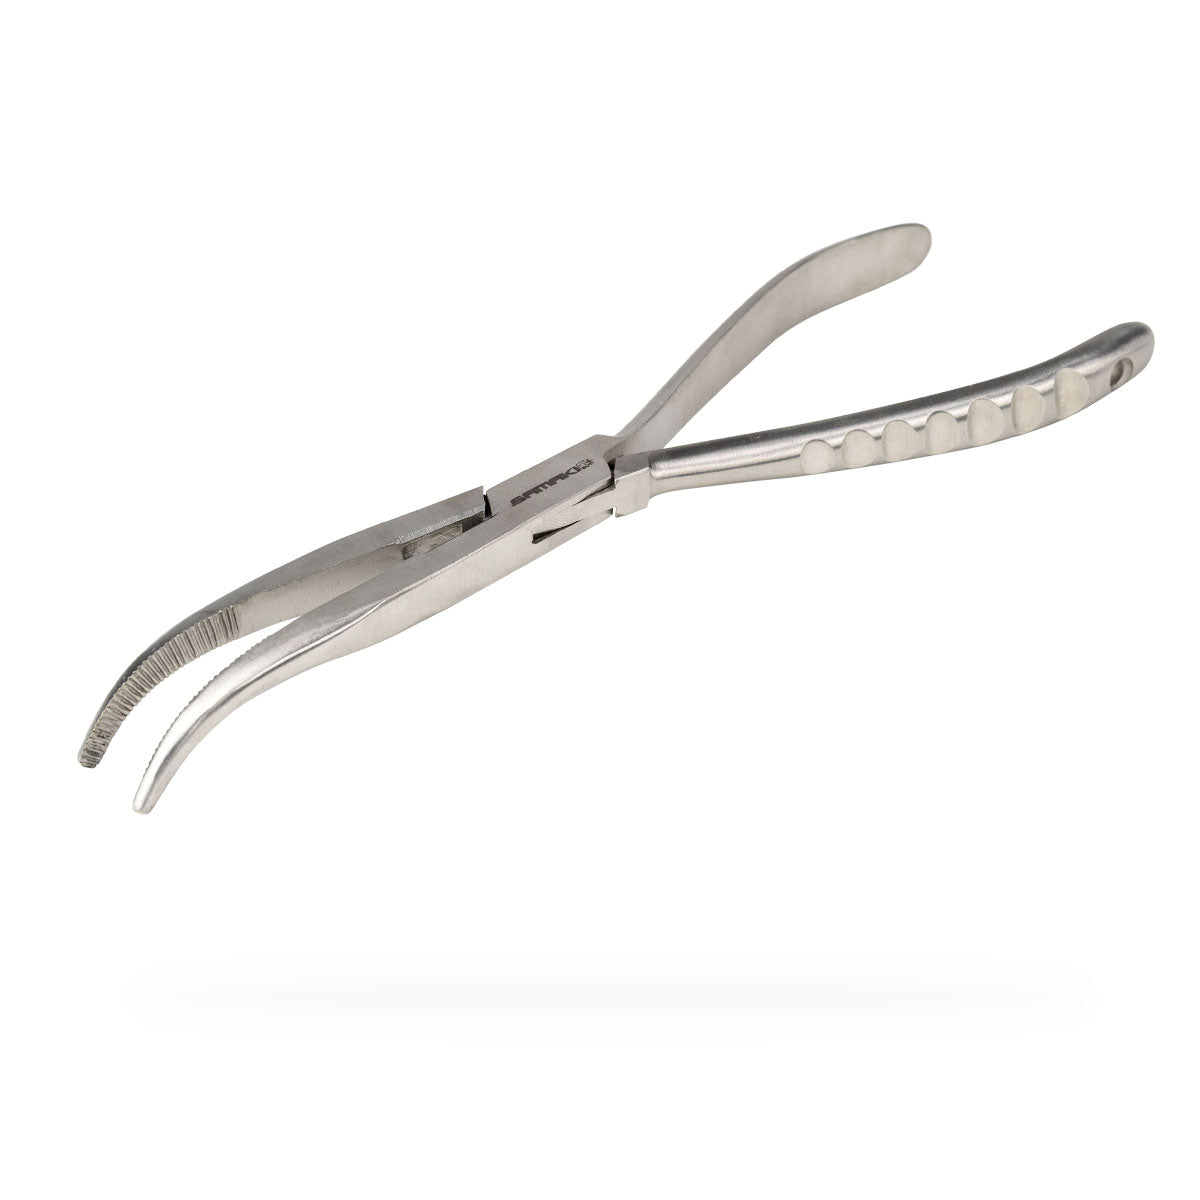 Stainless Steel 215mm Bent Long Nose Plier